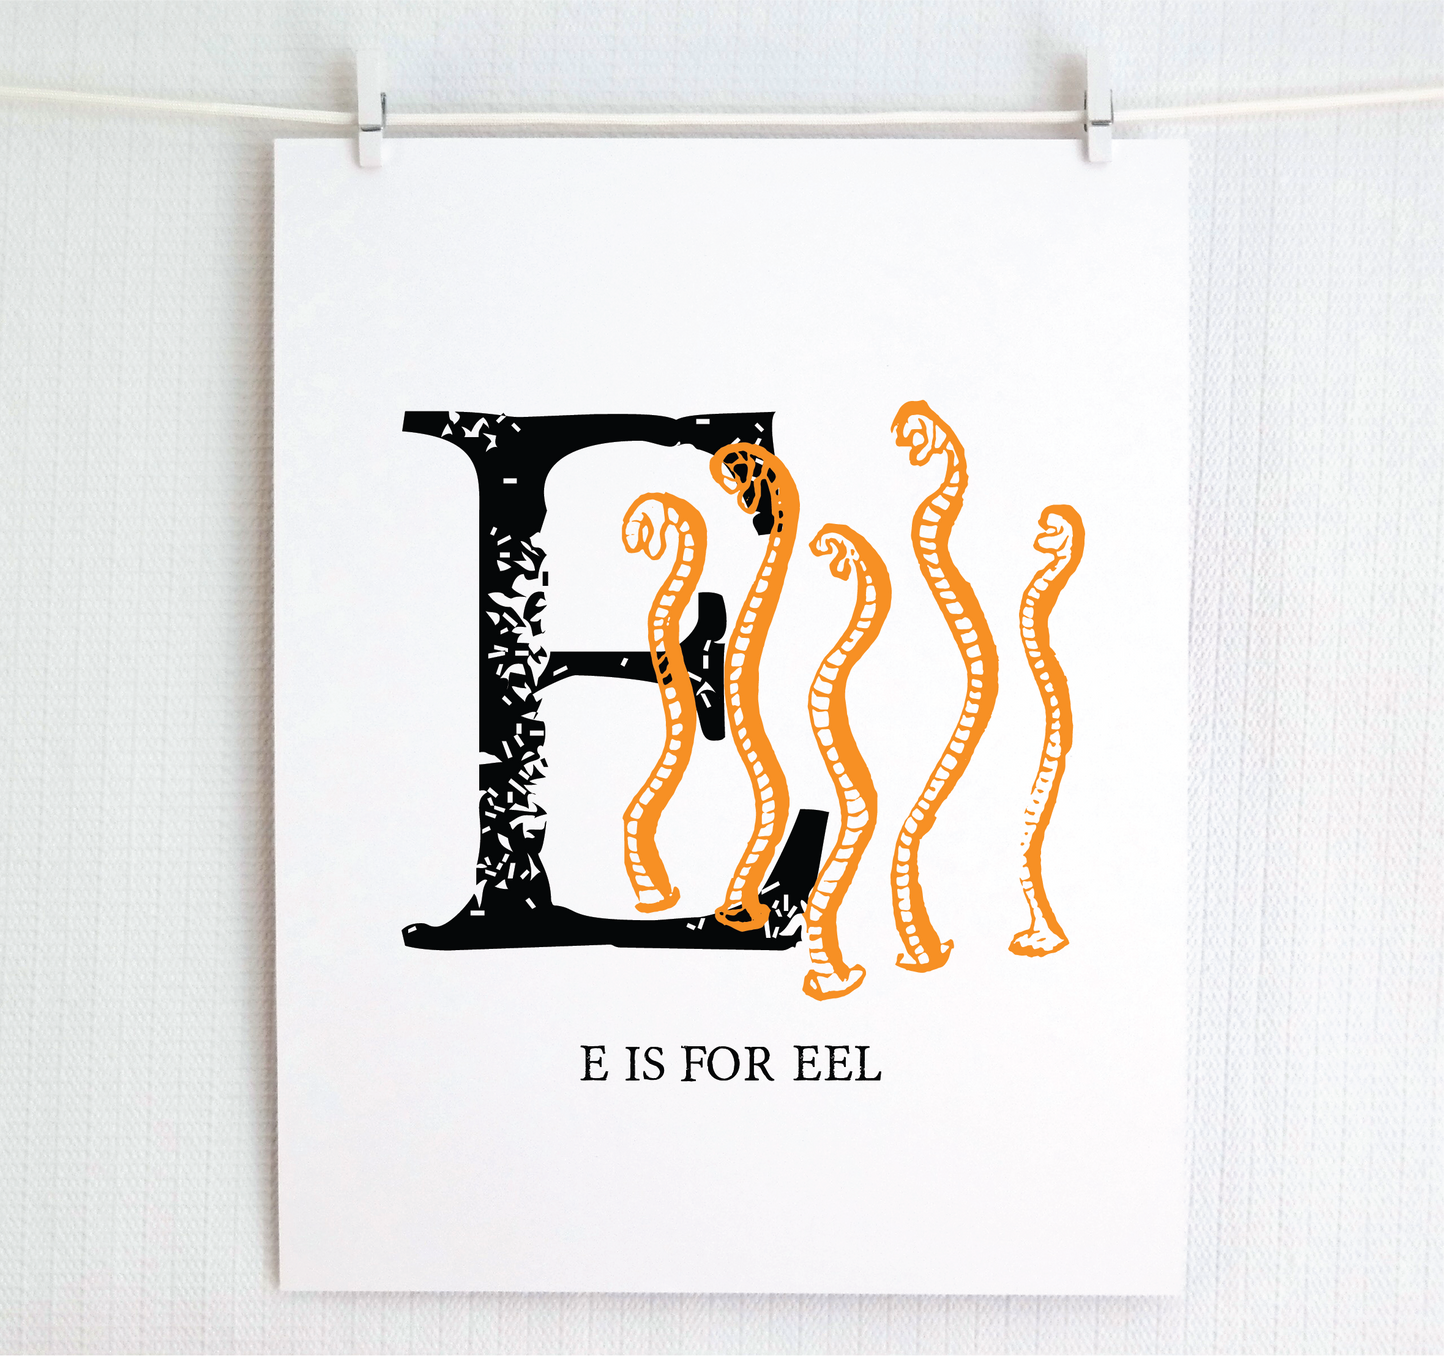 E is for Eels